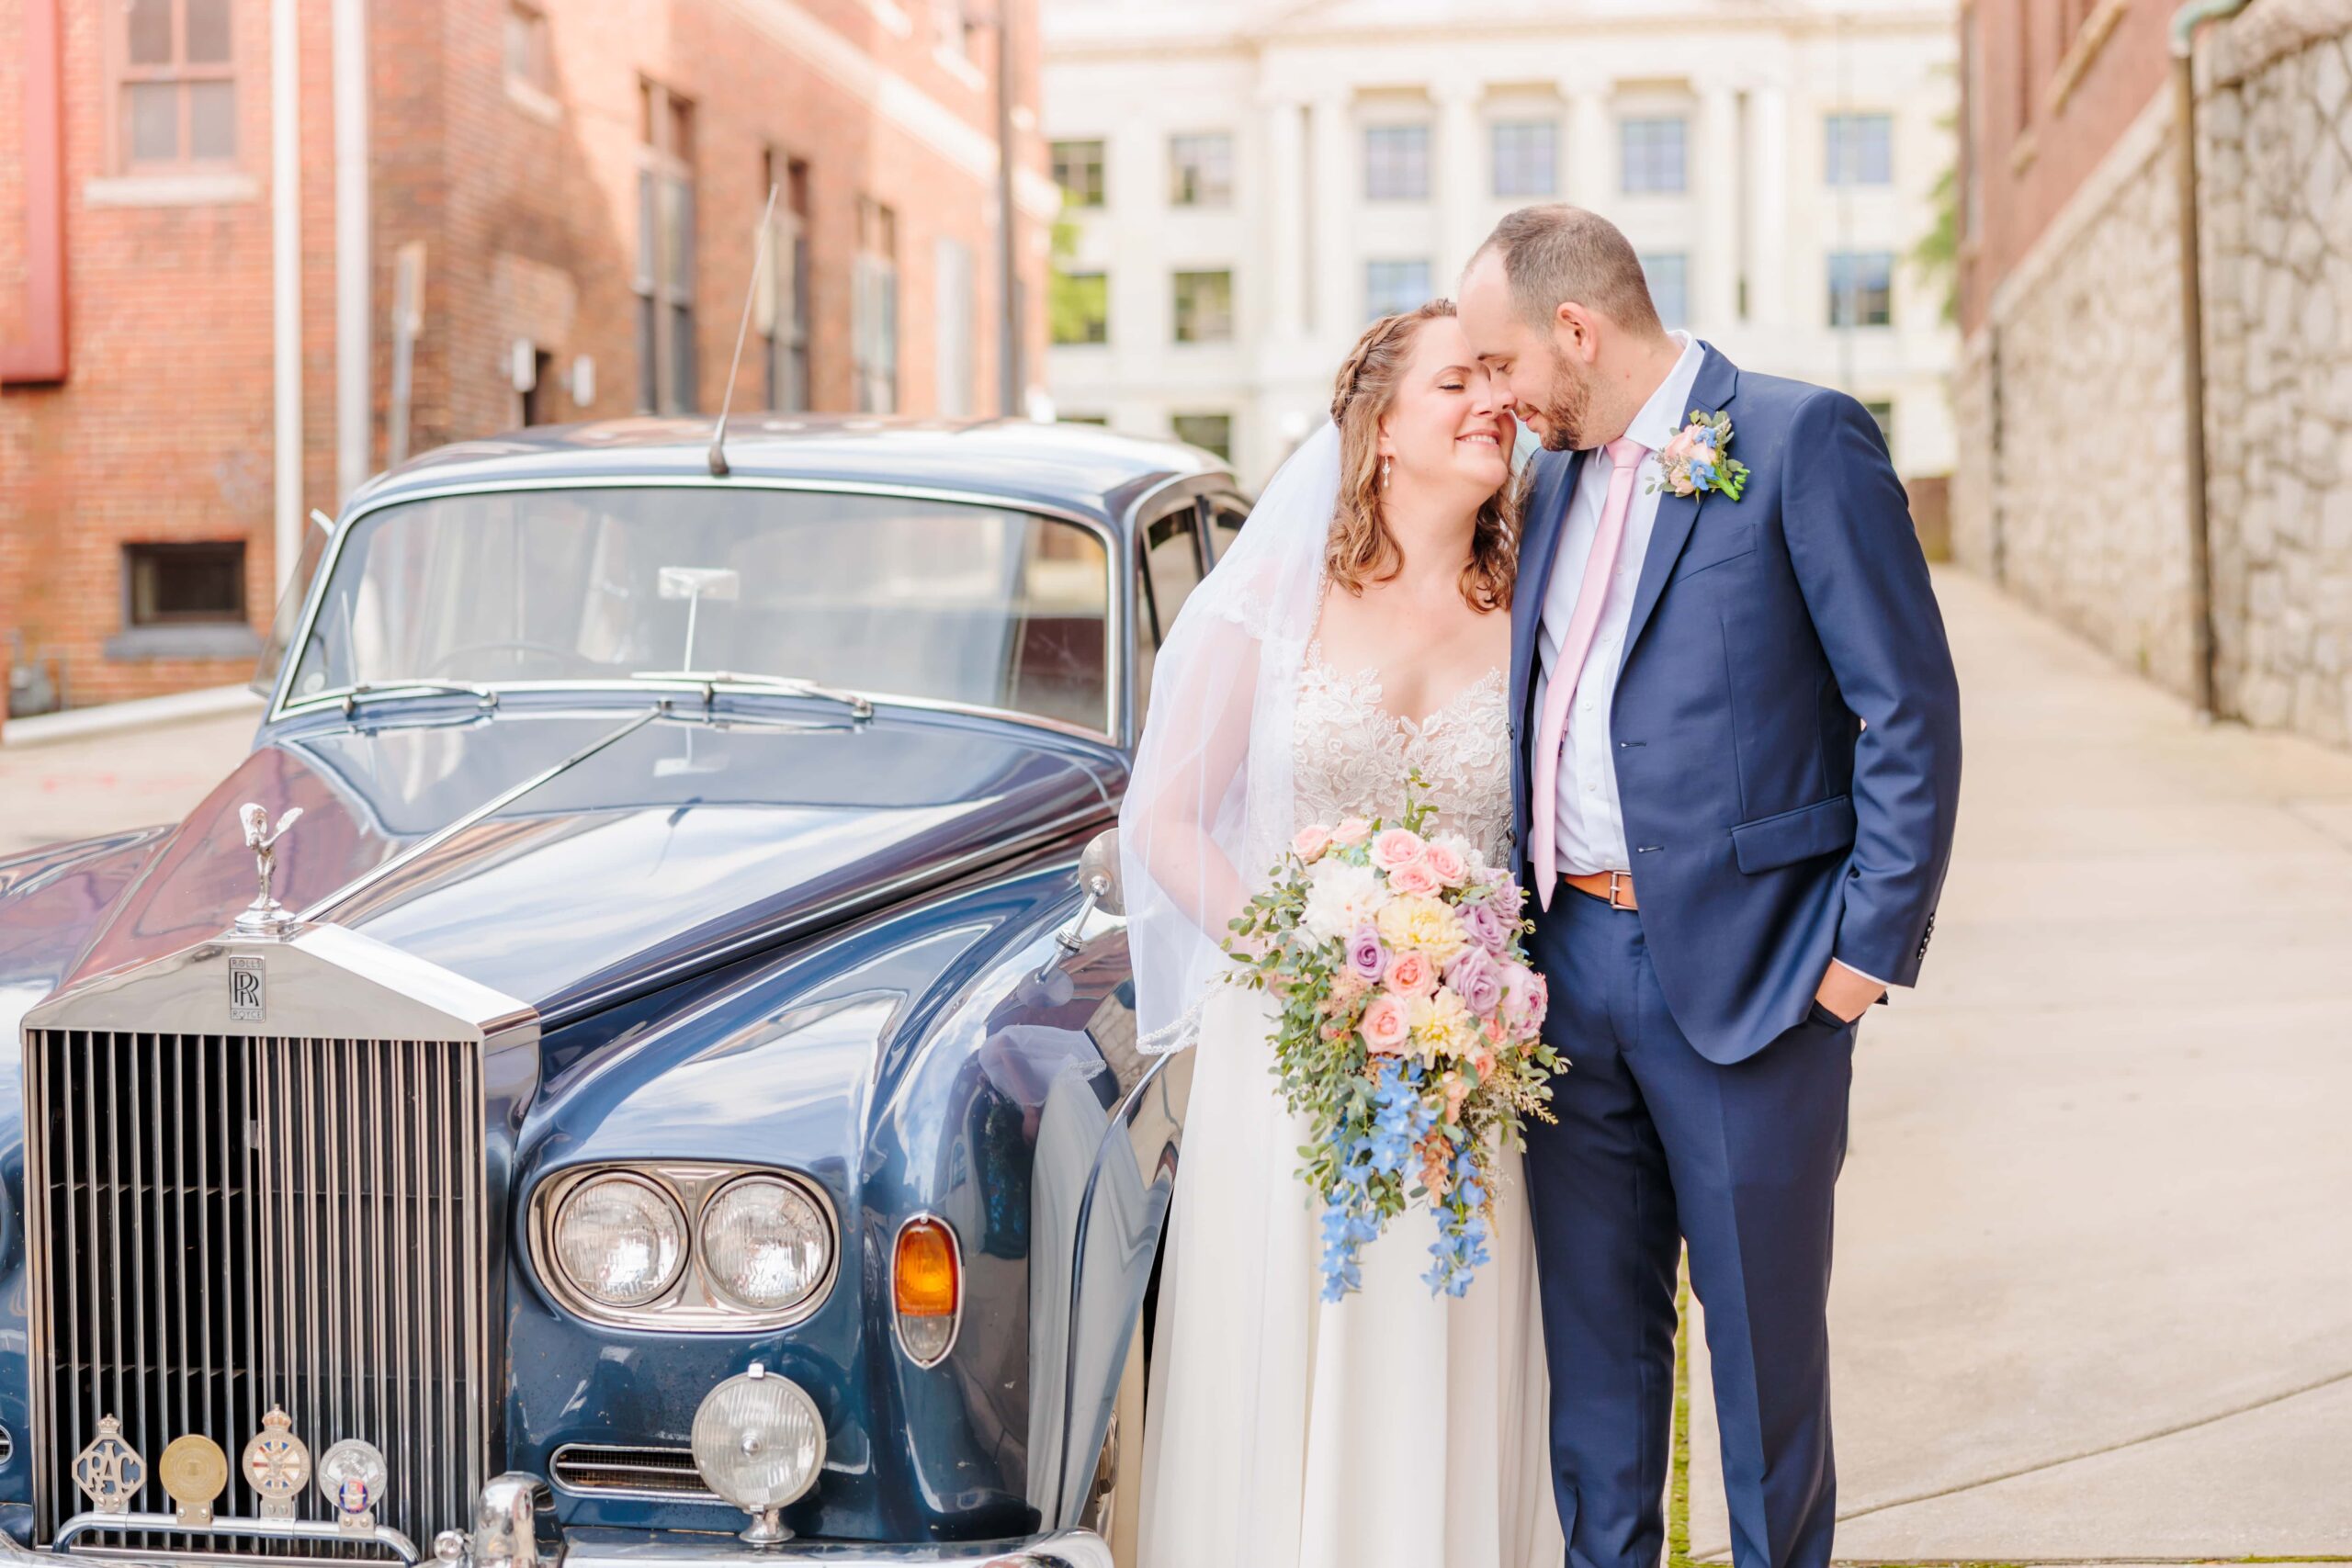 Emelia and Wakefield smile closely at each other in downtown Greensboro, NC after their wedding.